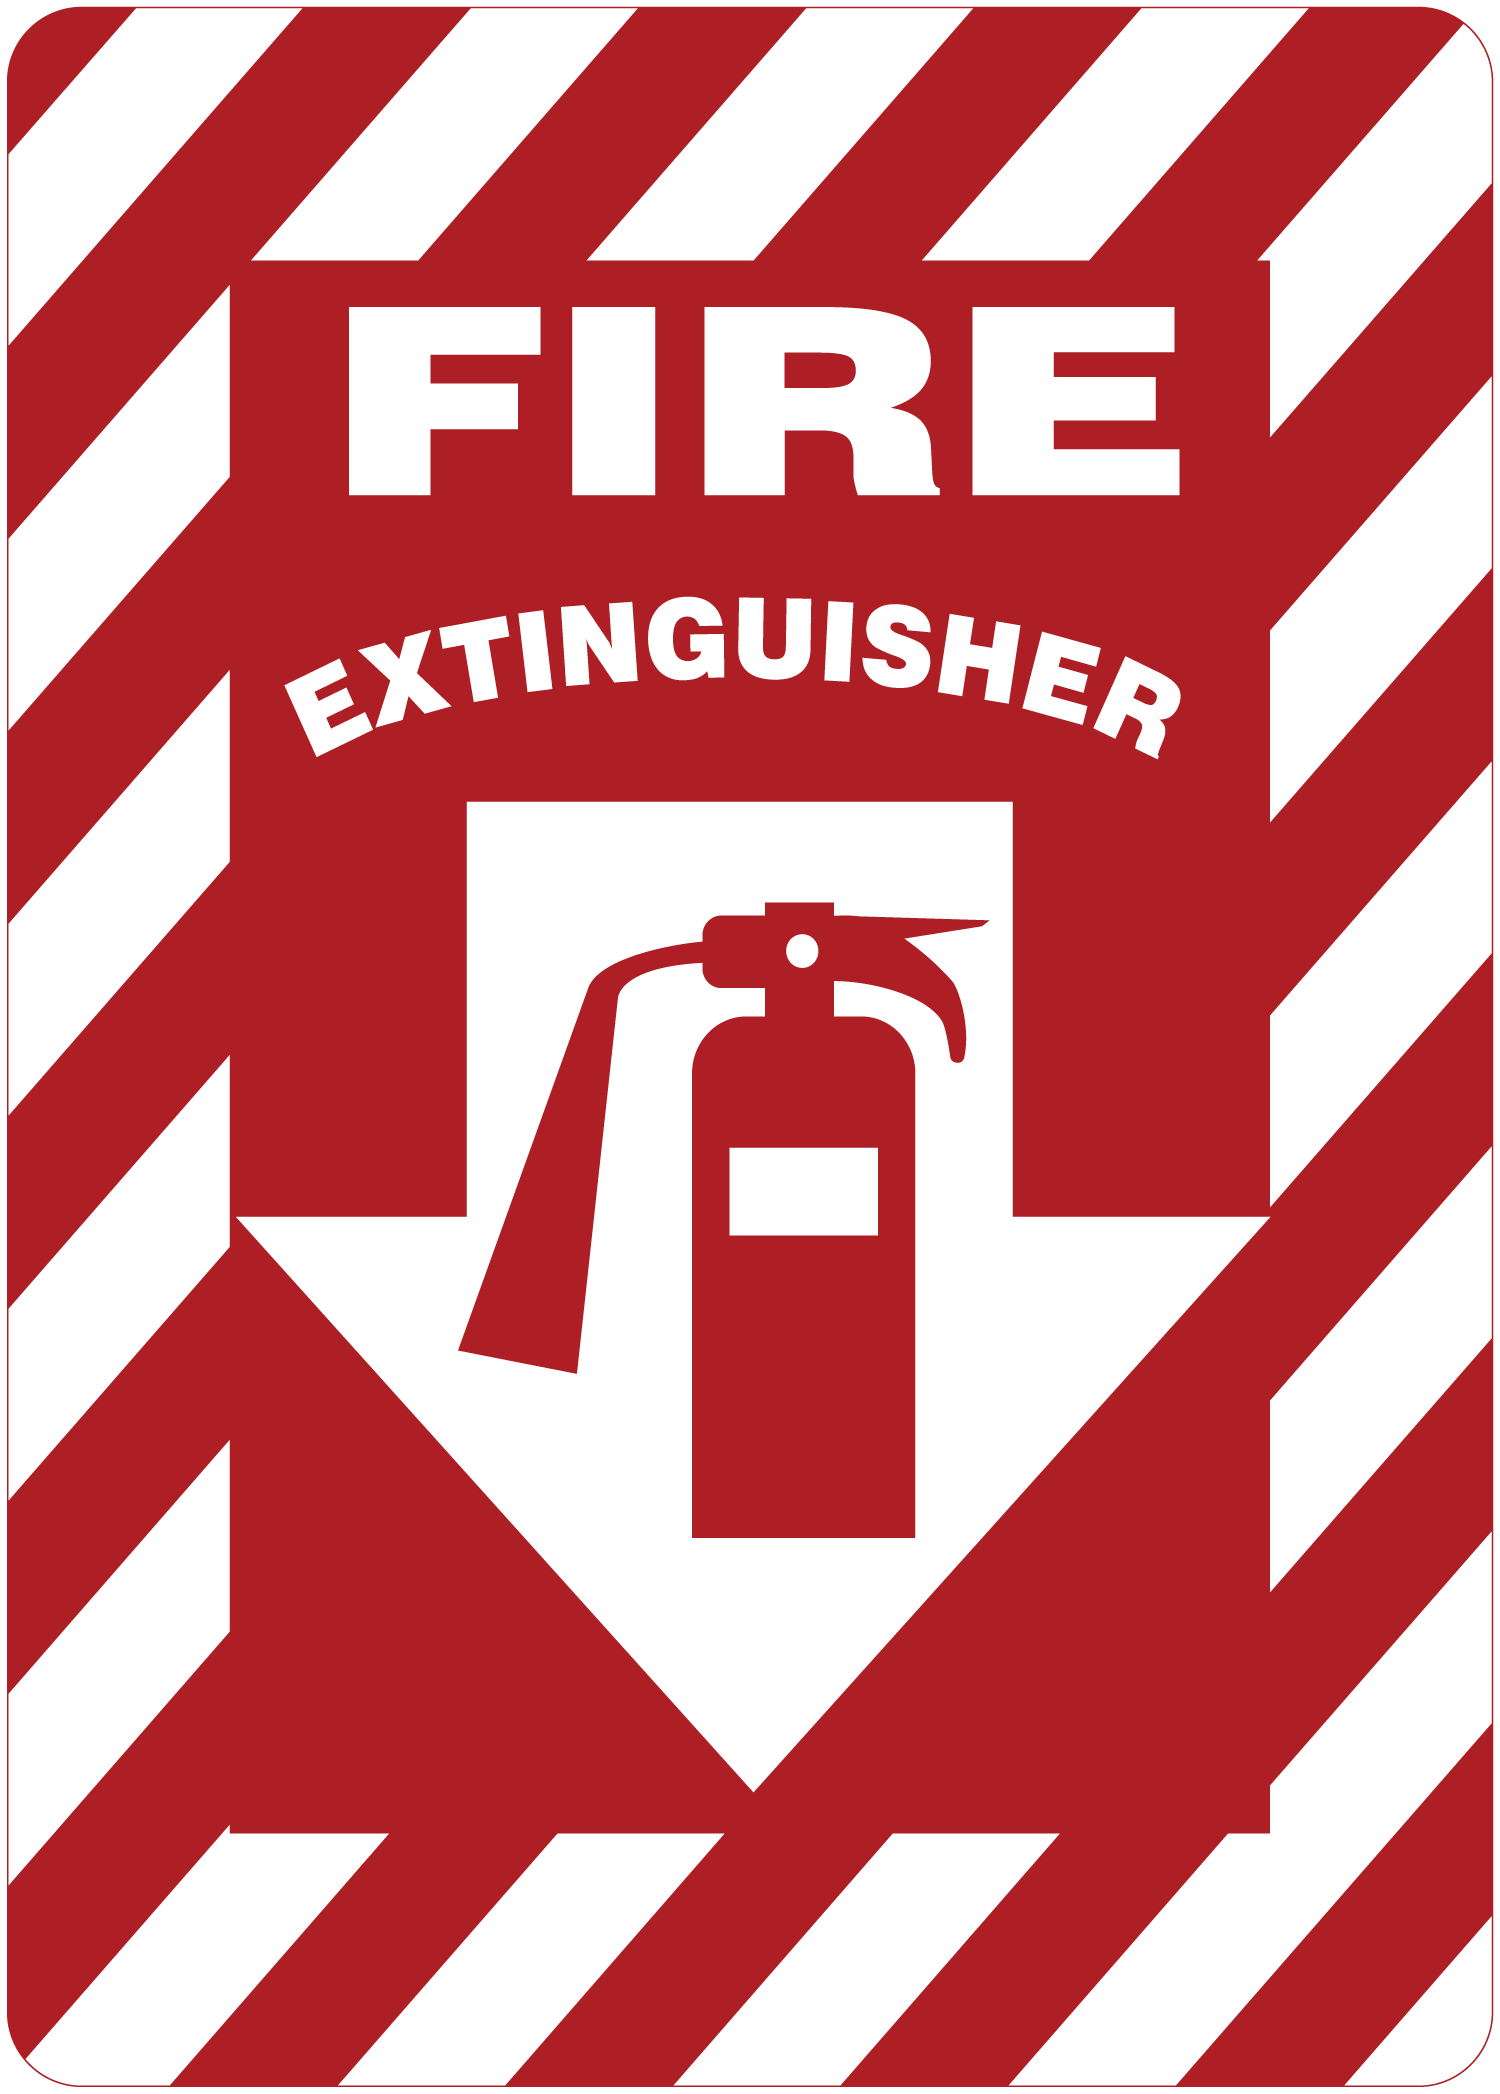 printable-fire-extinguisher-sign